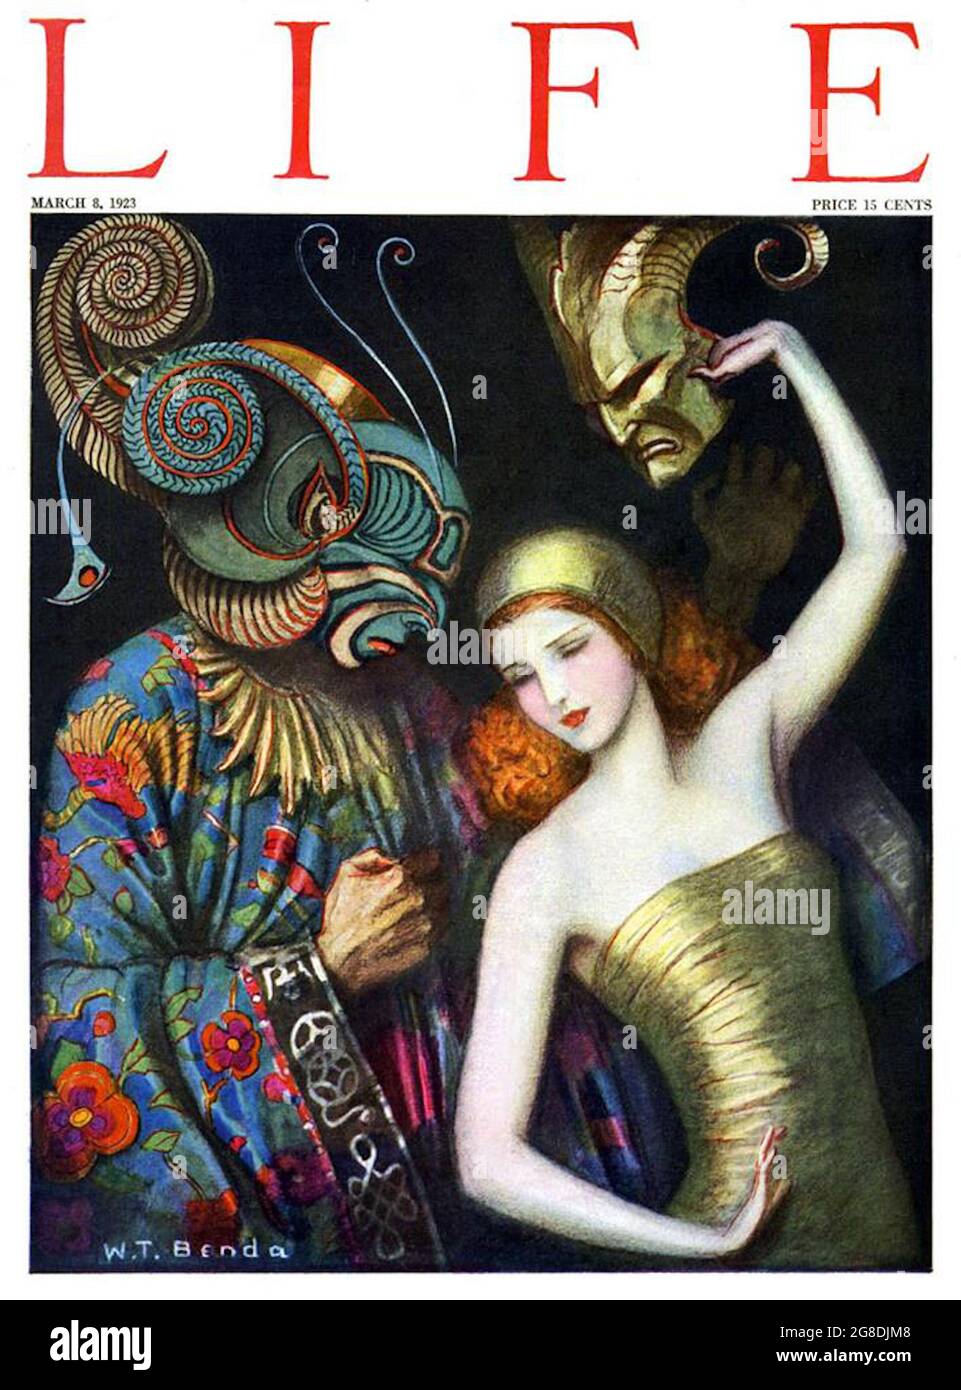 Władysław Teodor Benda - Life Magazine cover design. Flamboyantly dressed masked man interacts with a woman holding a mask aloft. Stock Photo